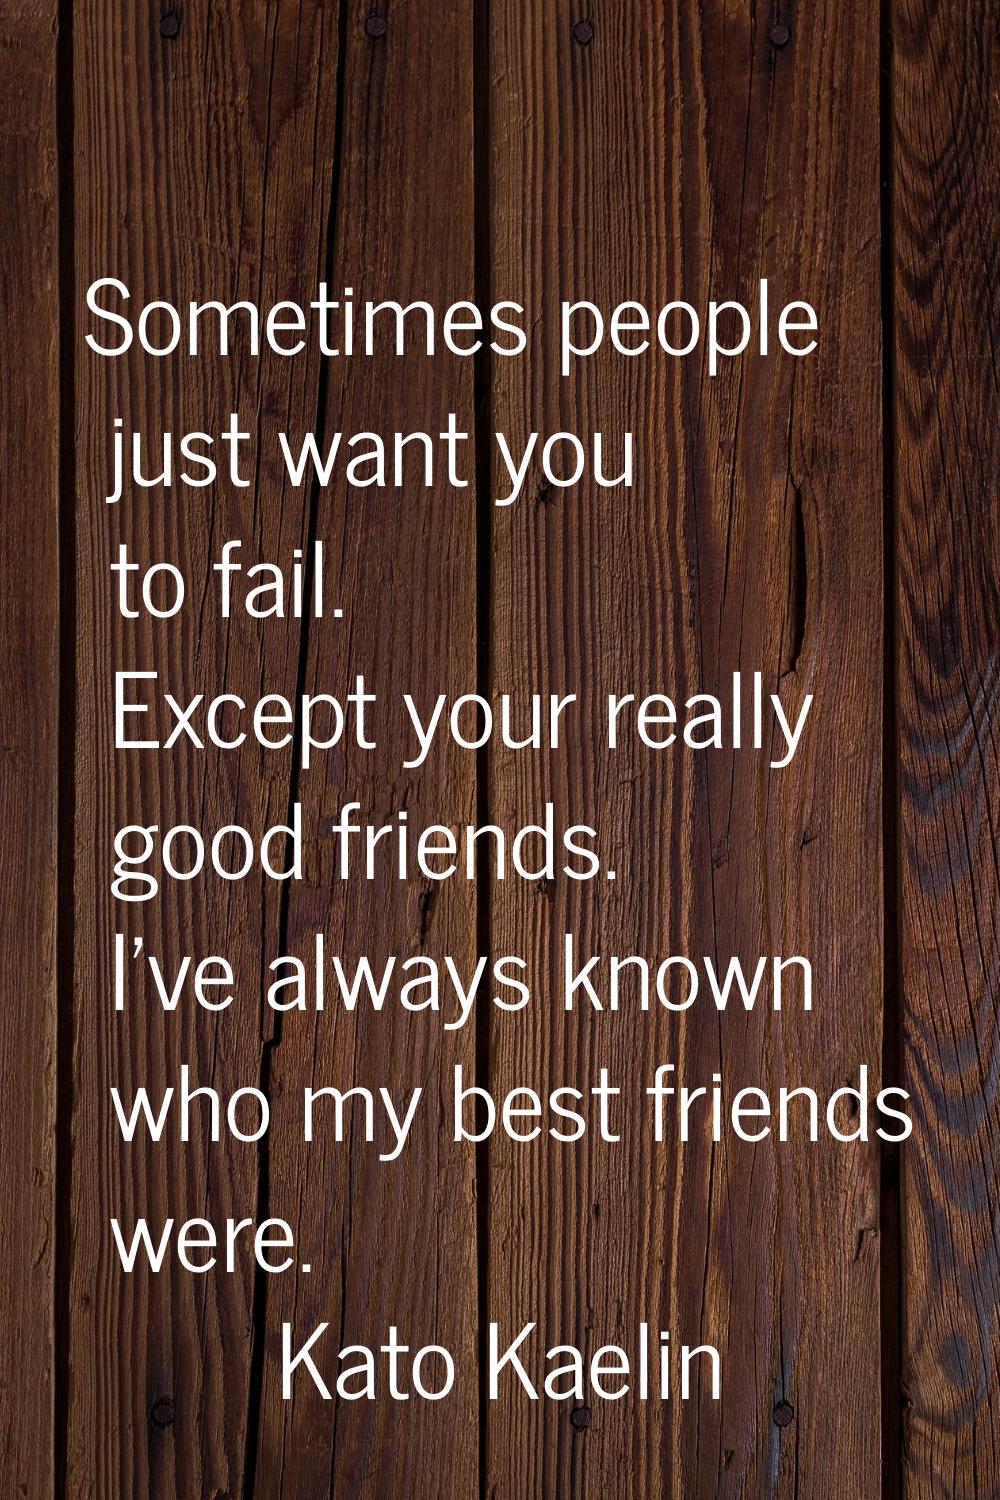 Sometimes people just want you to fail. Except your really good friends. I've always known who my b